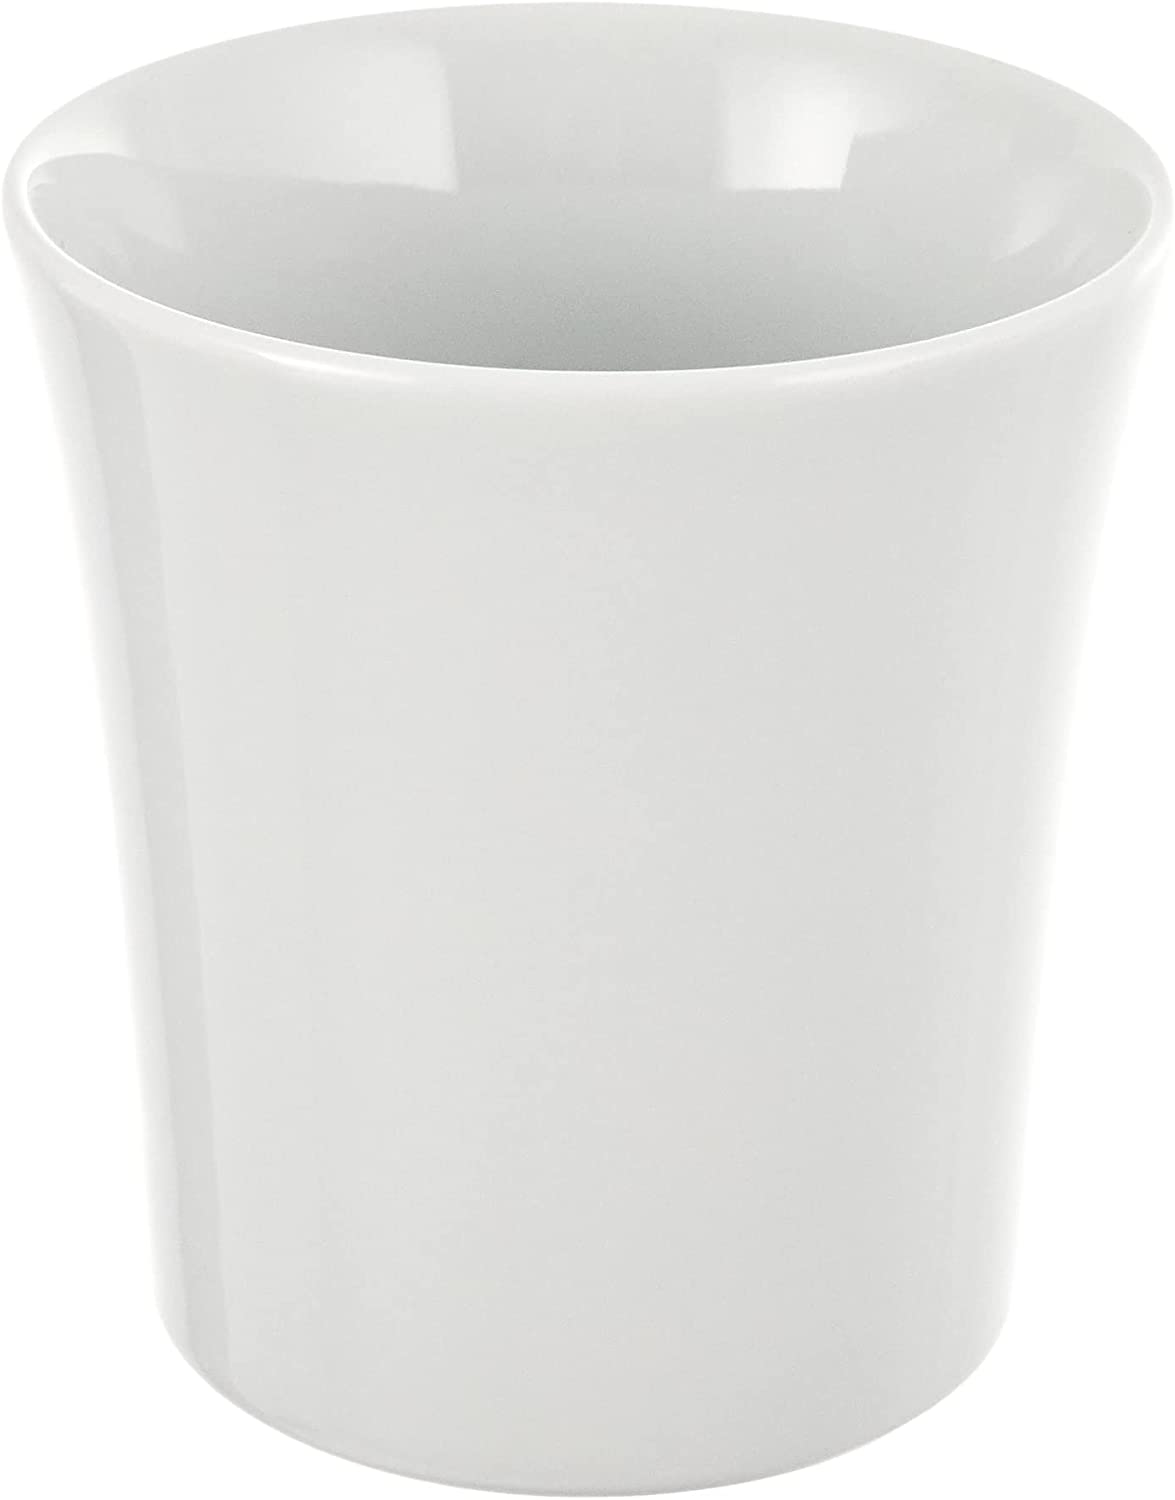 KAHLA Update Mug Without Handle 10-1/4 oz, White Color, 1 Piece